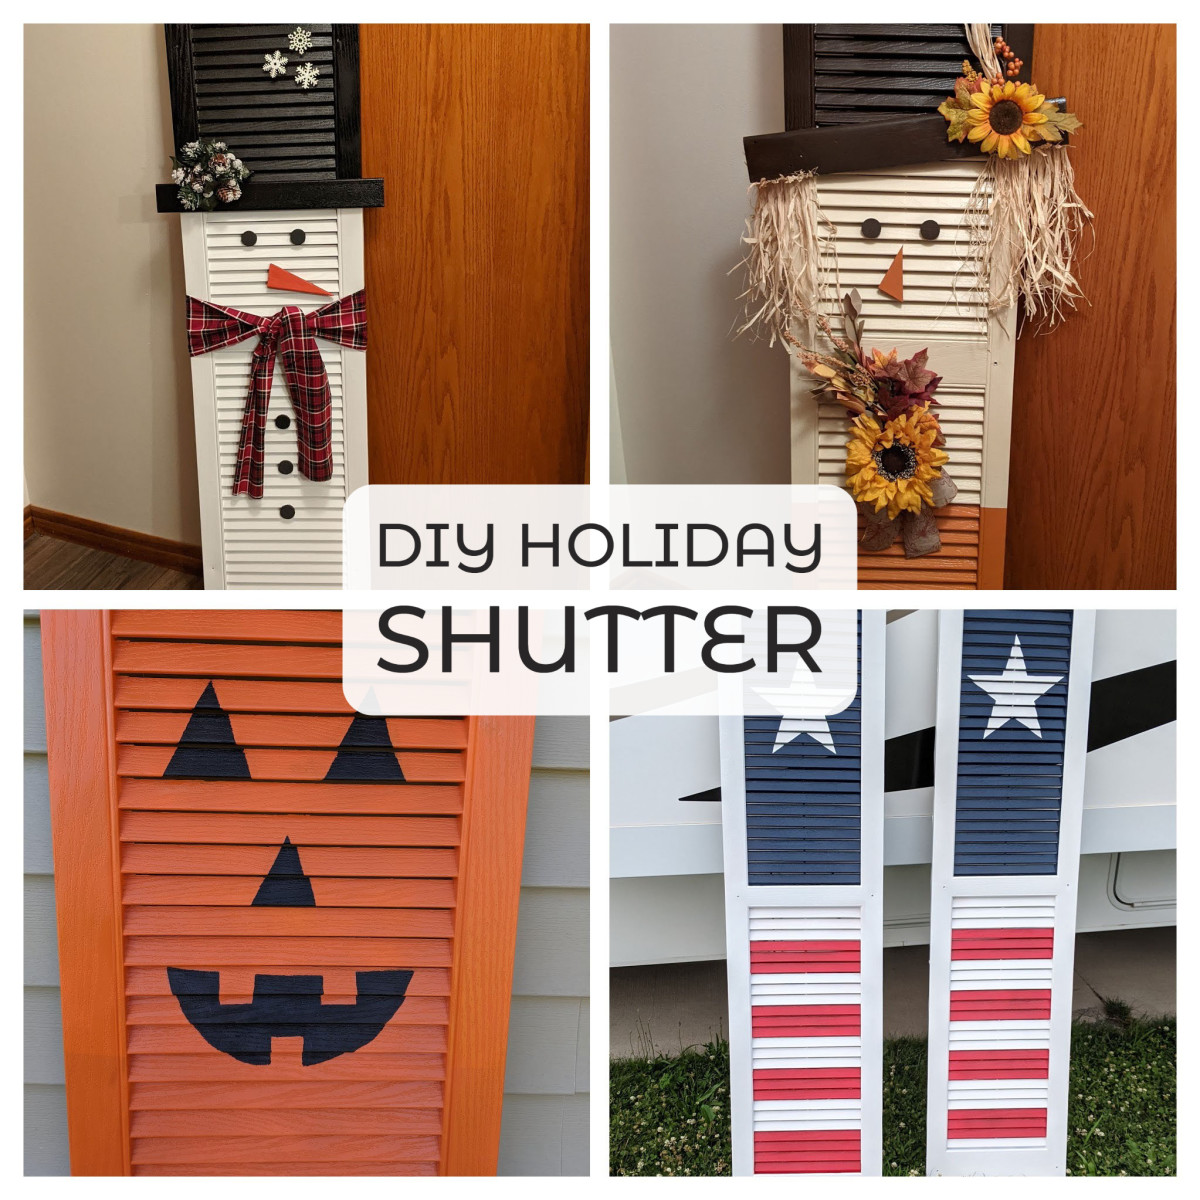 If you have trouble getting rid of stuff like old shutters, upcycle them into festive and artistic creations.